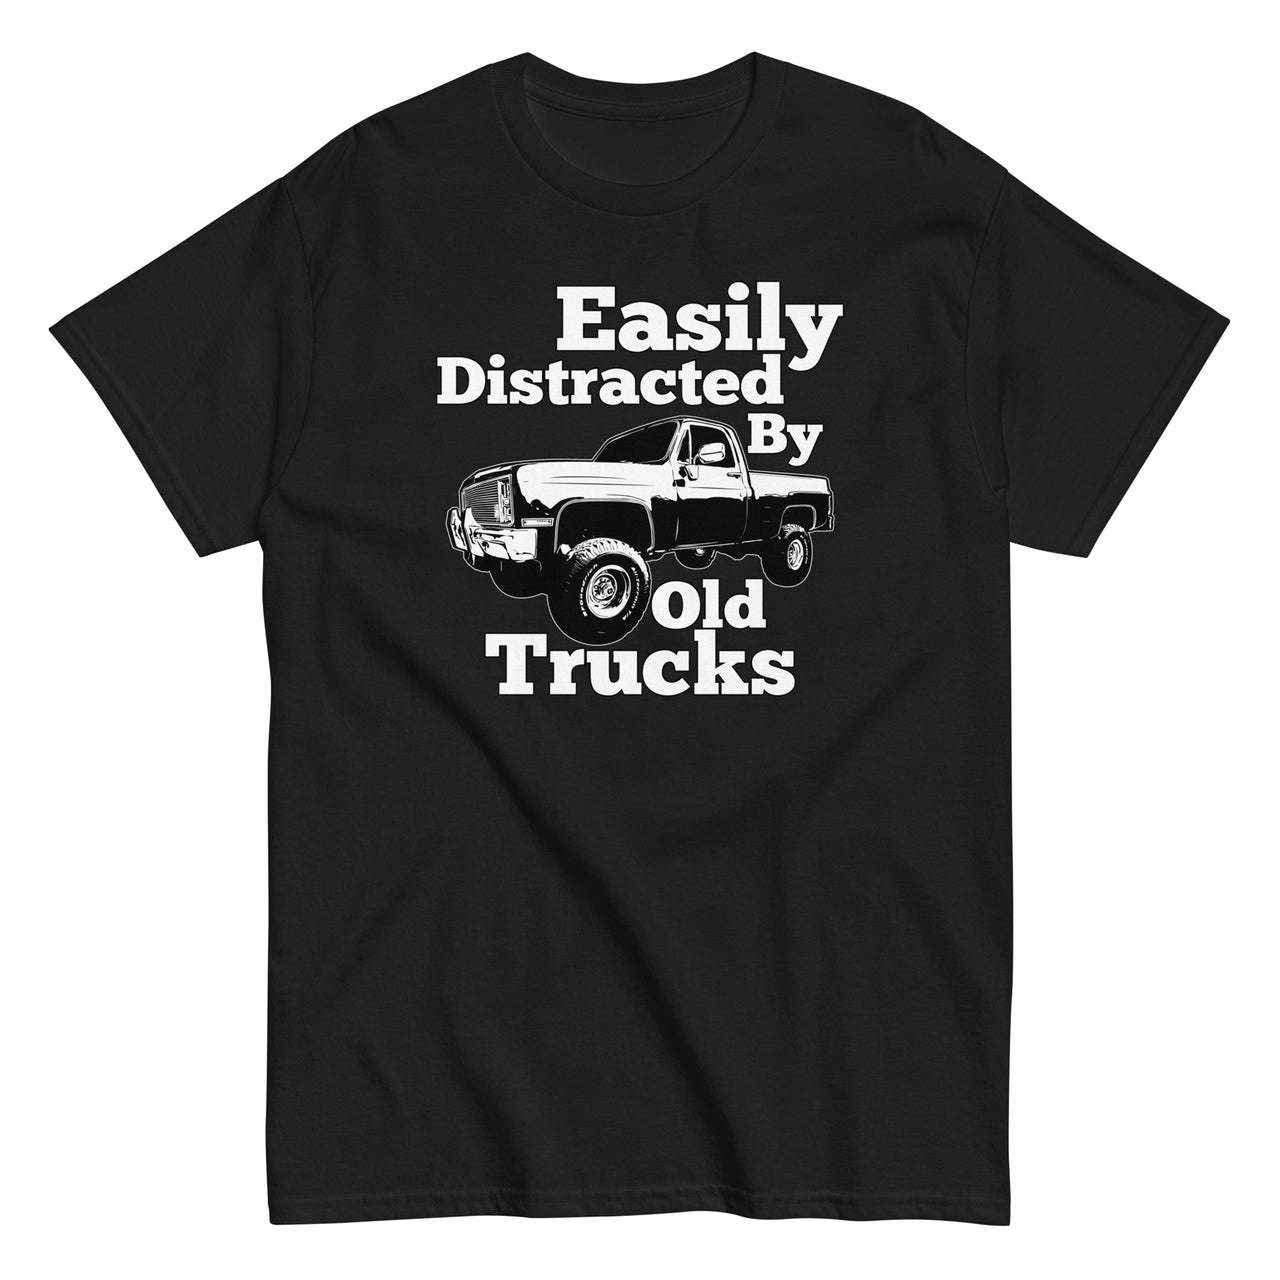 black Square Body Truck T-Shirt - Easily Distracted By Old Trucks